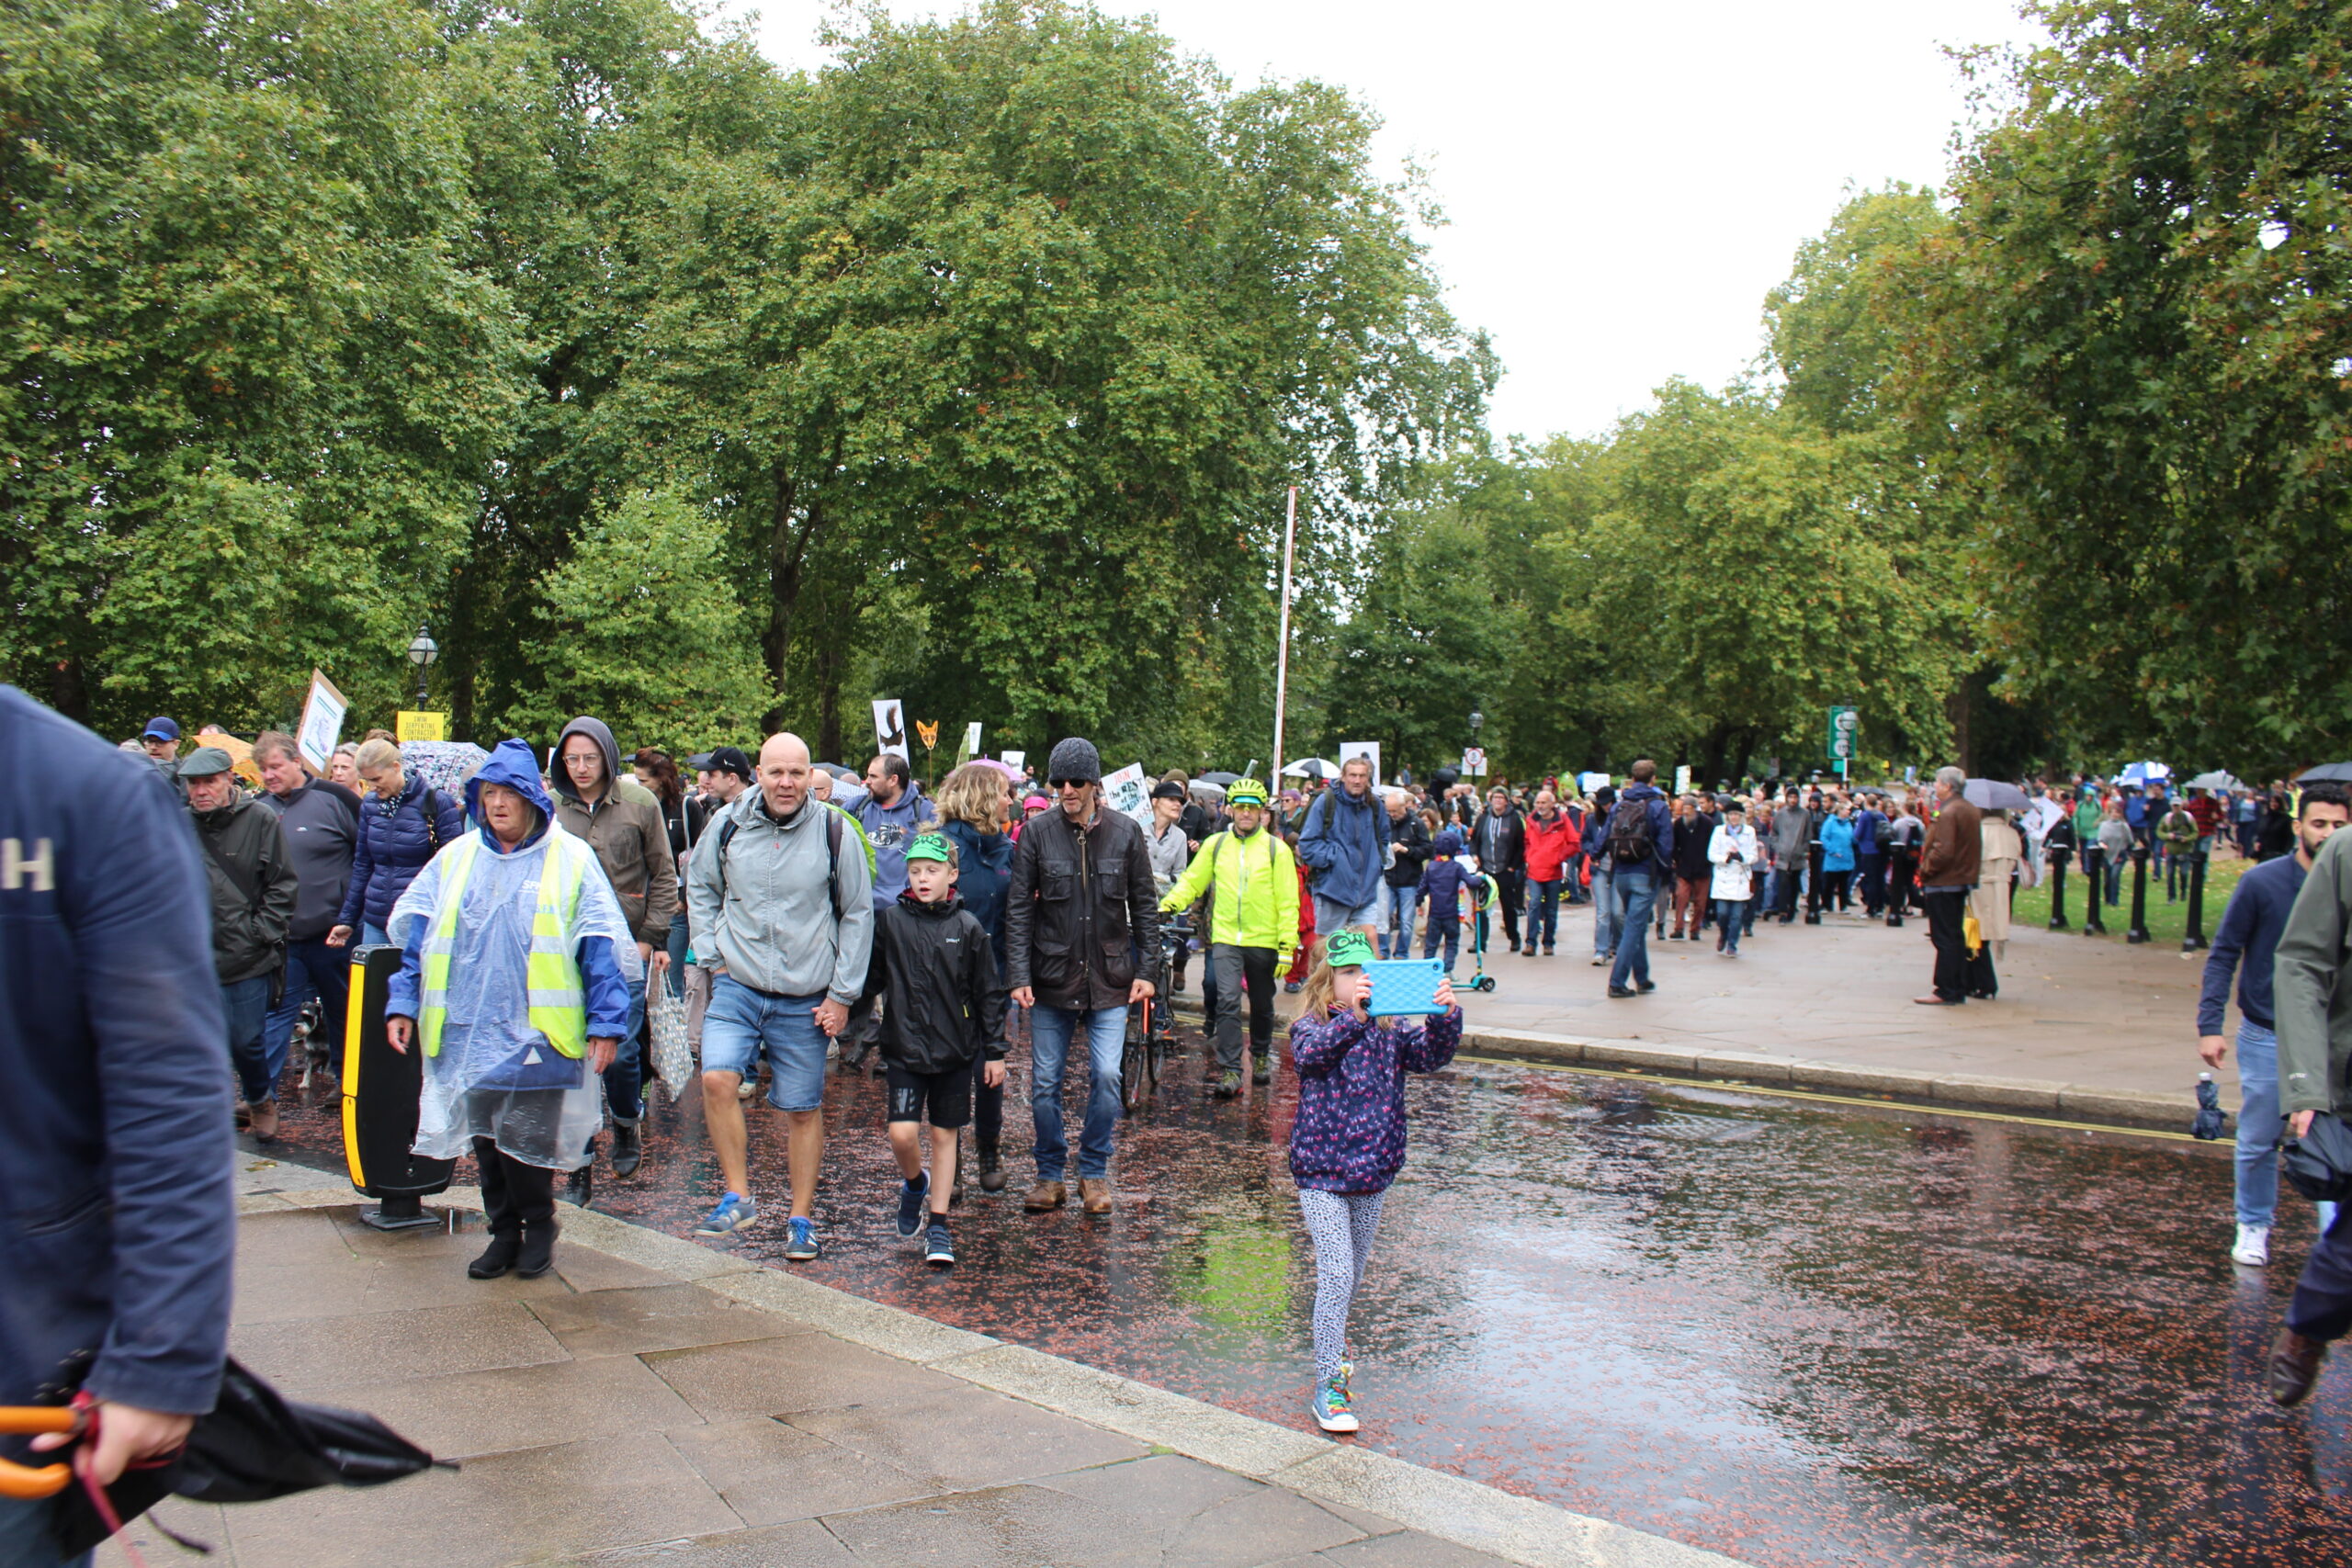 Ten thousand walk for Britain’s disappearing wildlife